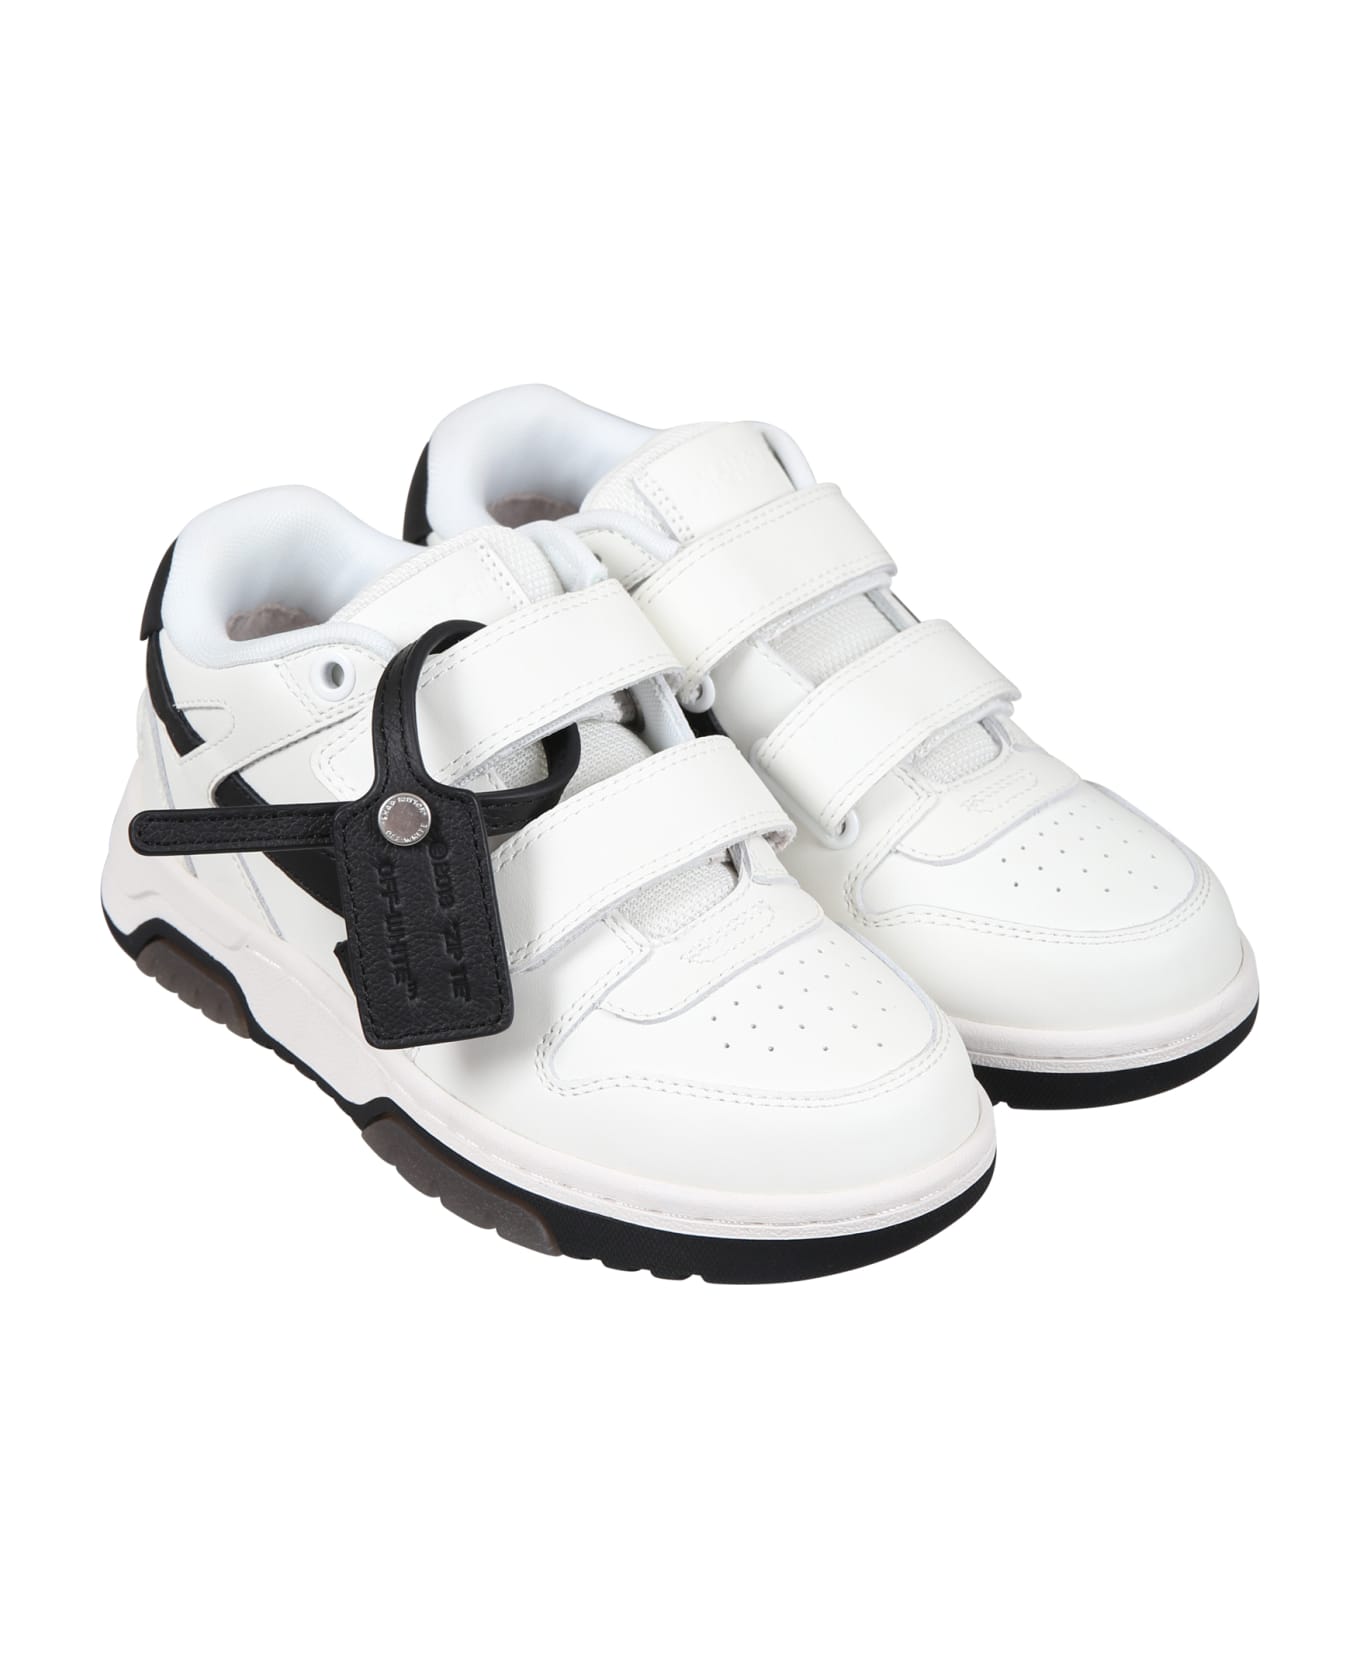 Off-White White Sneakers For Kids With Iconic Arrow - White シューズ